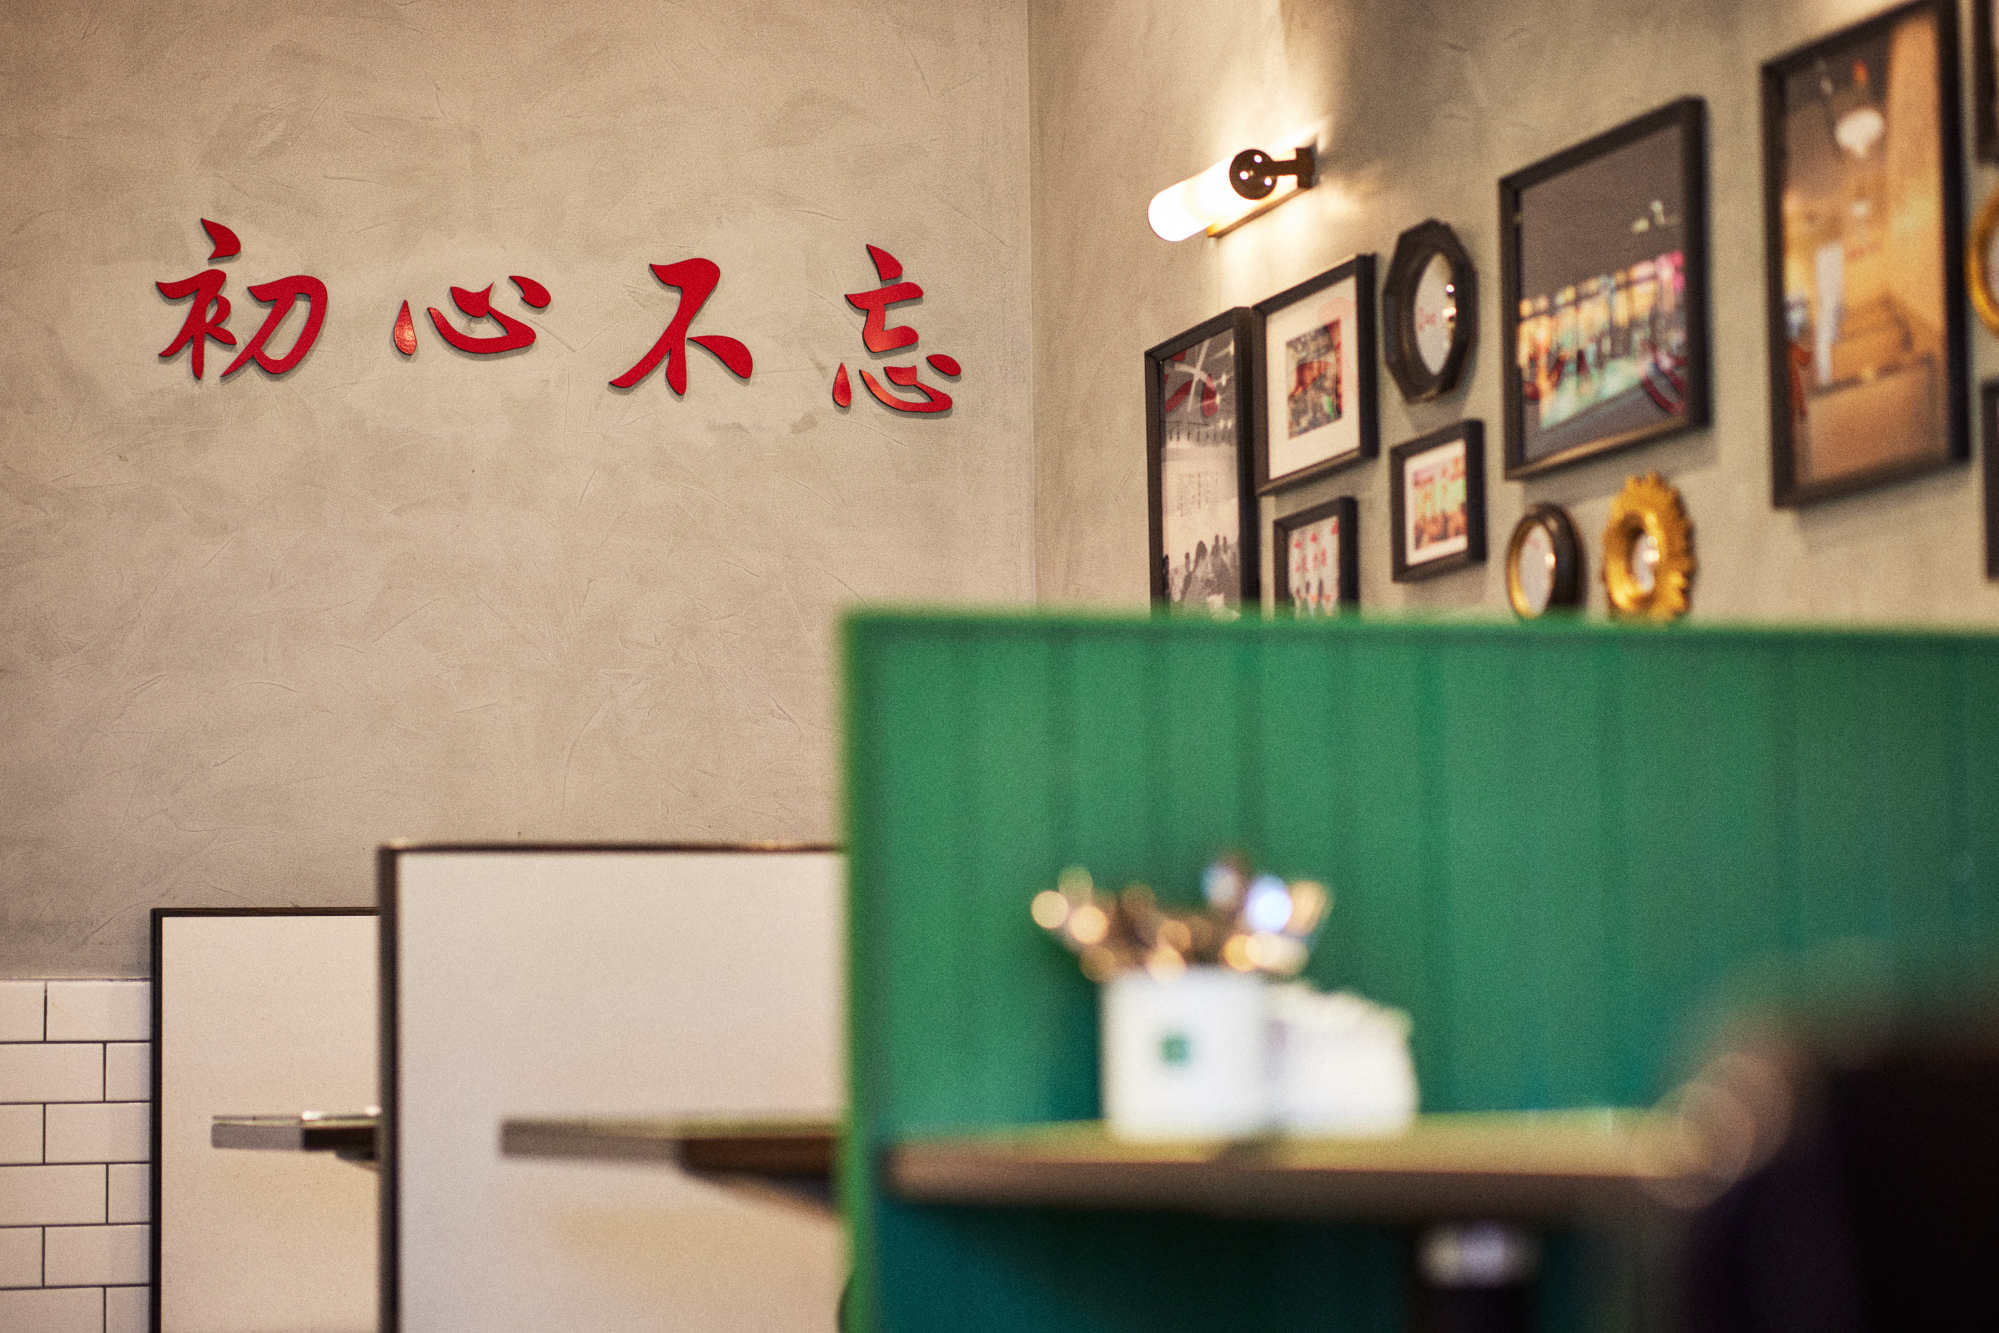 the sydney cafe where memories of old hong kong live on through milk tea, loud cantopop, and ‘a bit of education’ about cantonese food